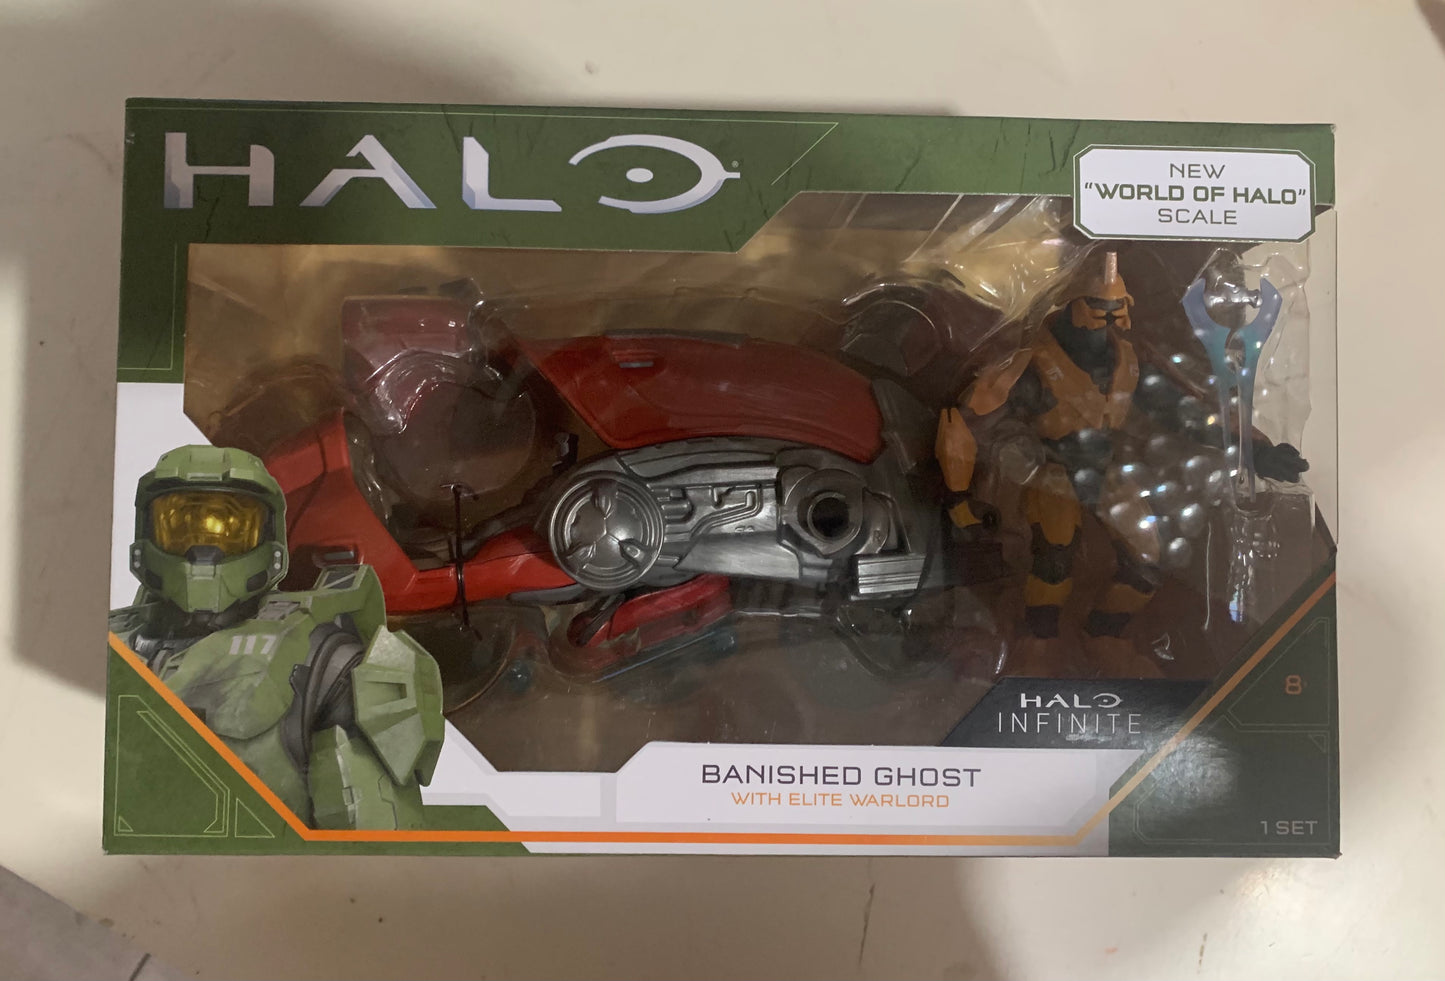 Halo 4” World of Halo Banished Ghost with Elite Warlord 38627